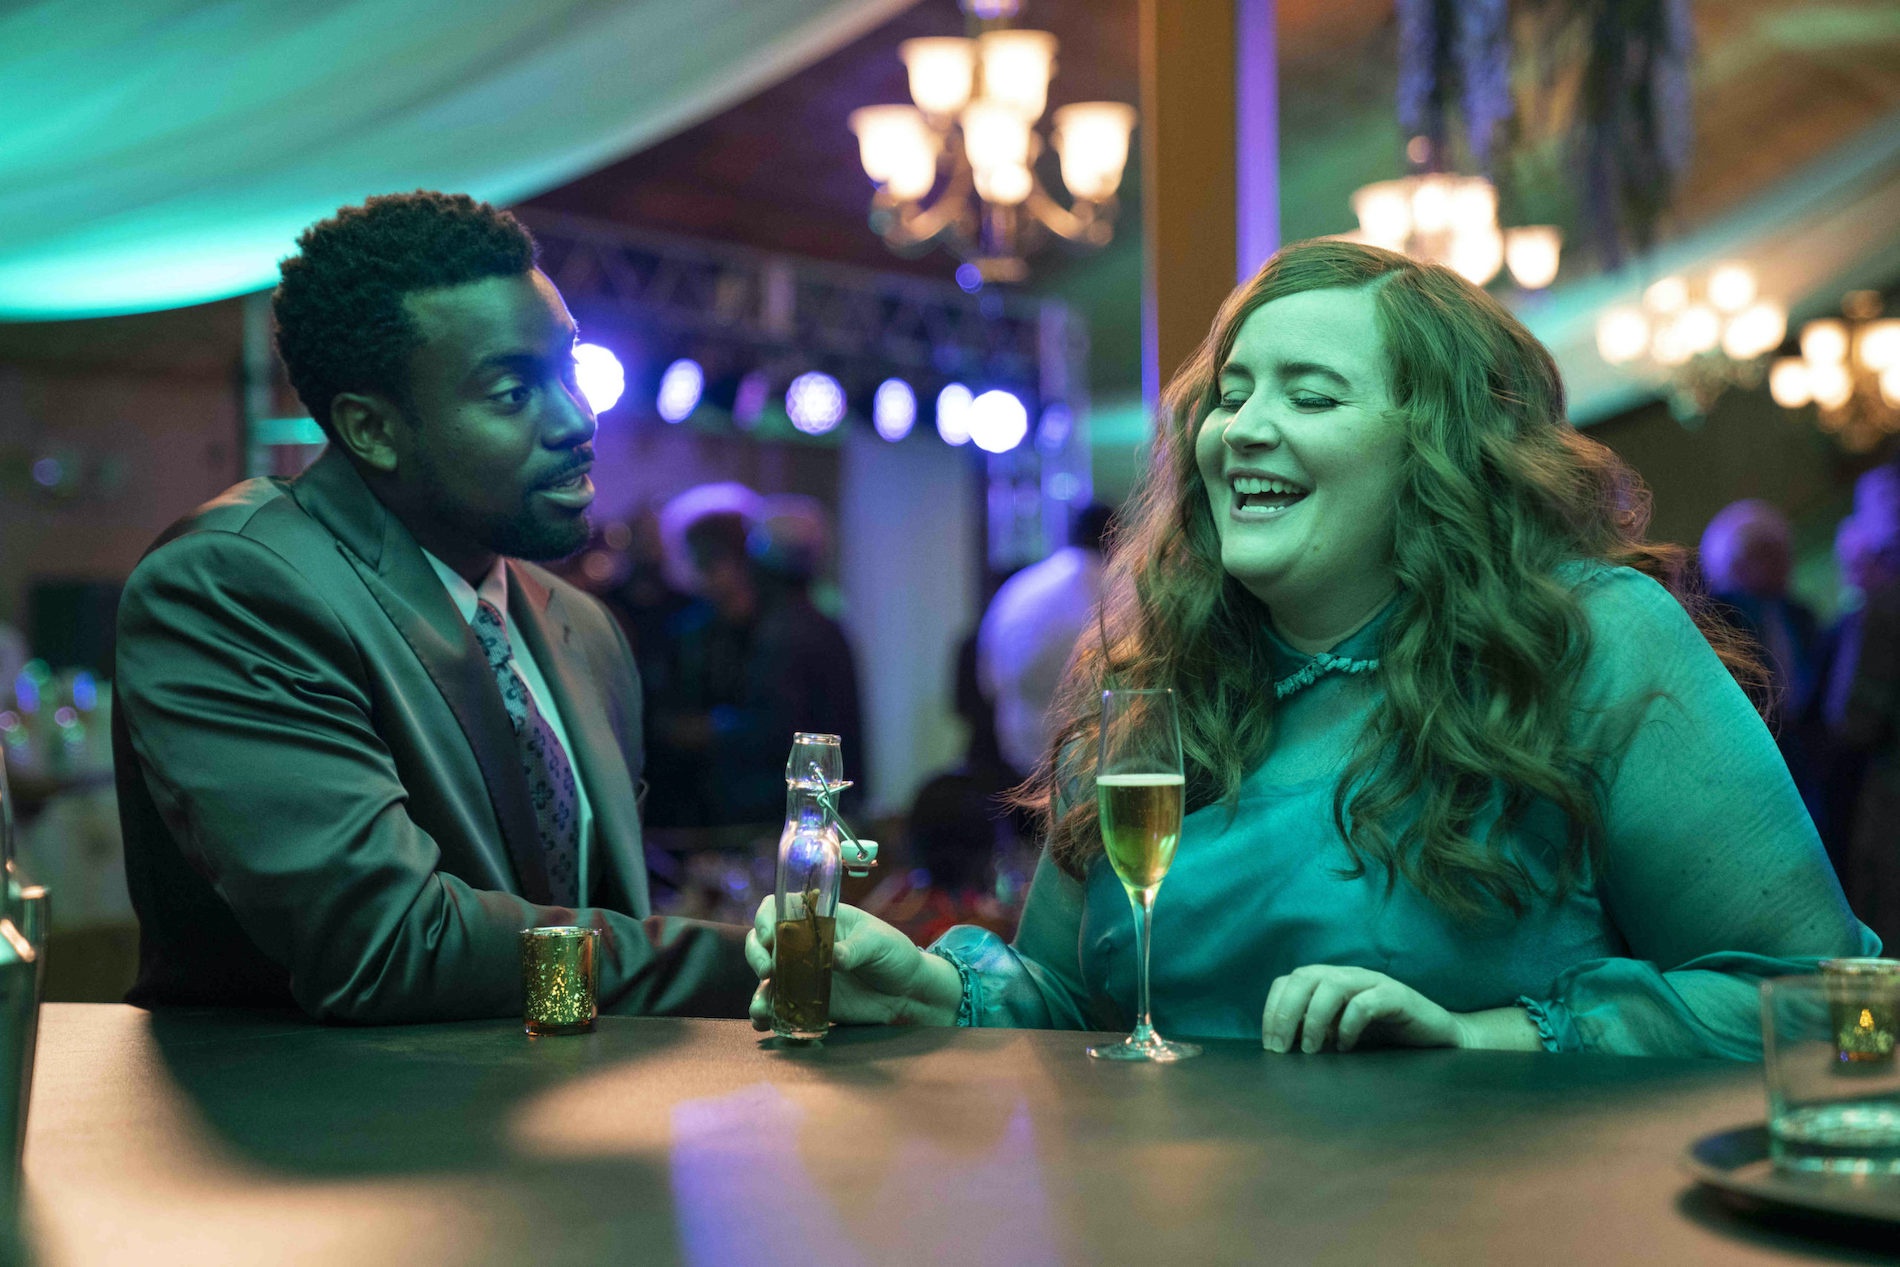 Aidy Bryant + Hulu’s ‘Shrill’ Are a Case Study for How to Write Your Own Work